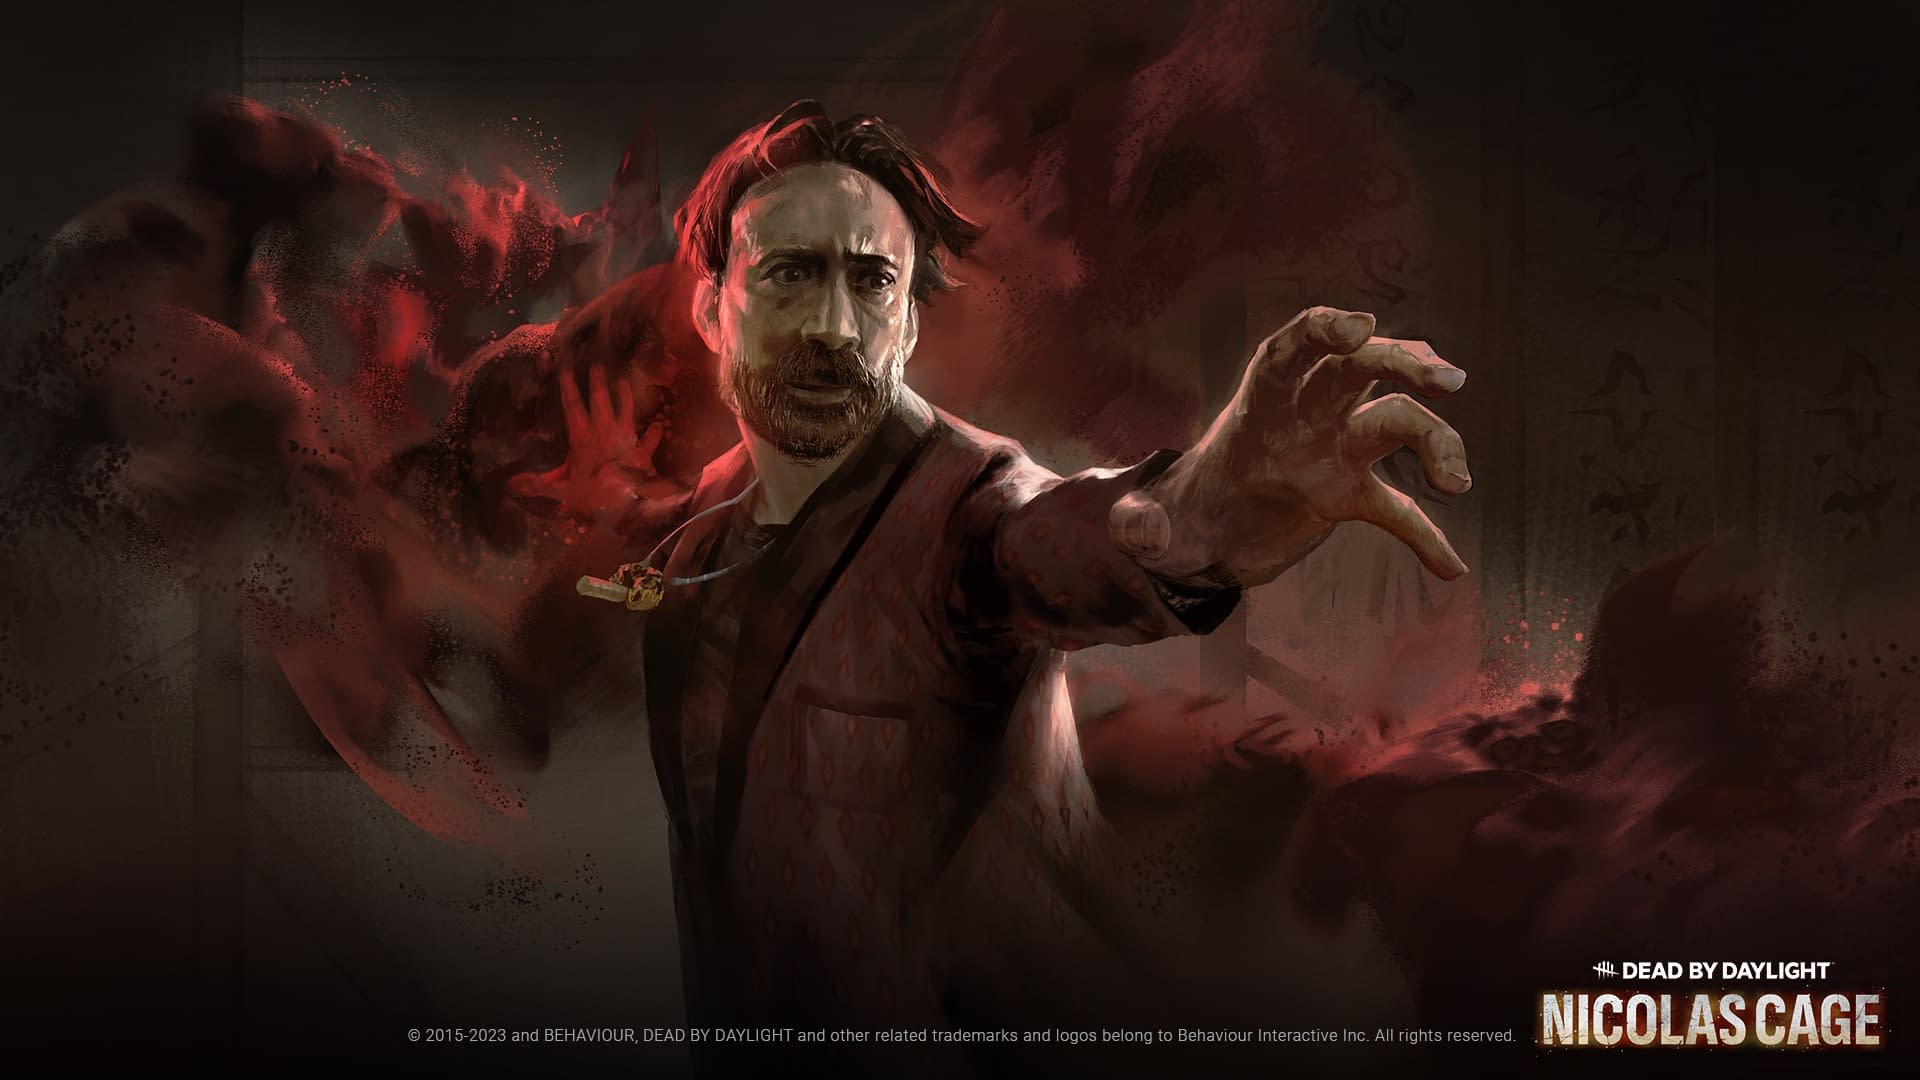 You can Play as Nicolas Cage near Dead By Daylight